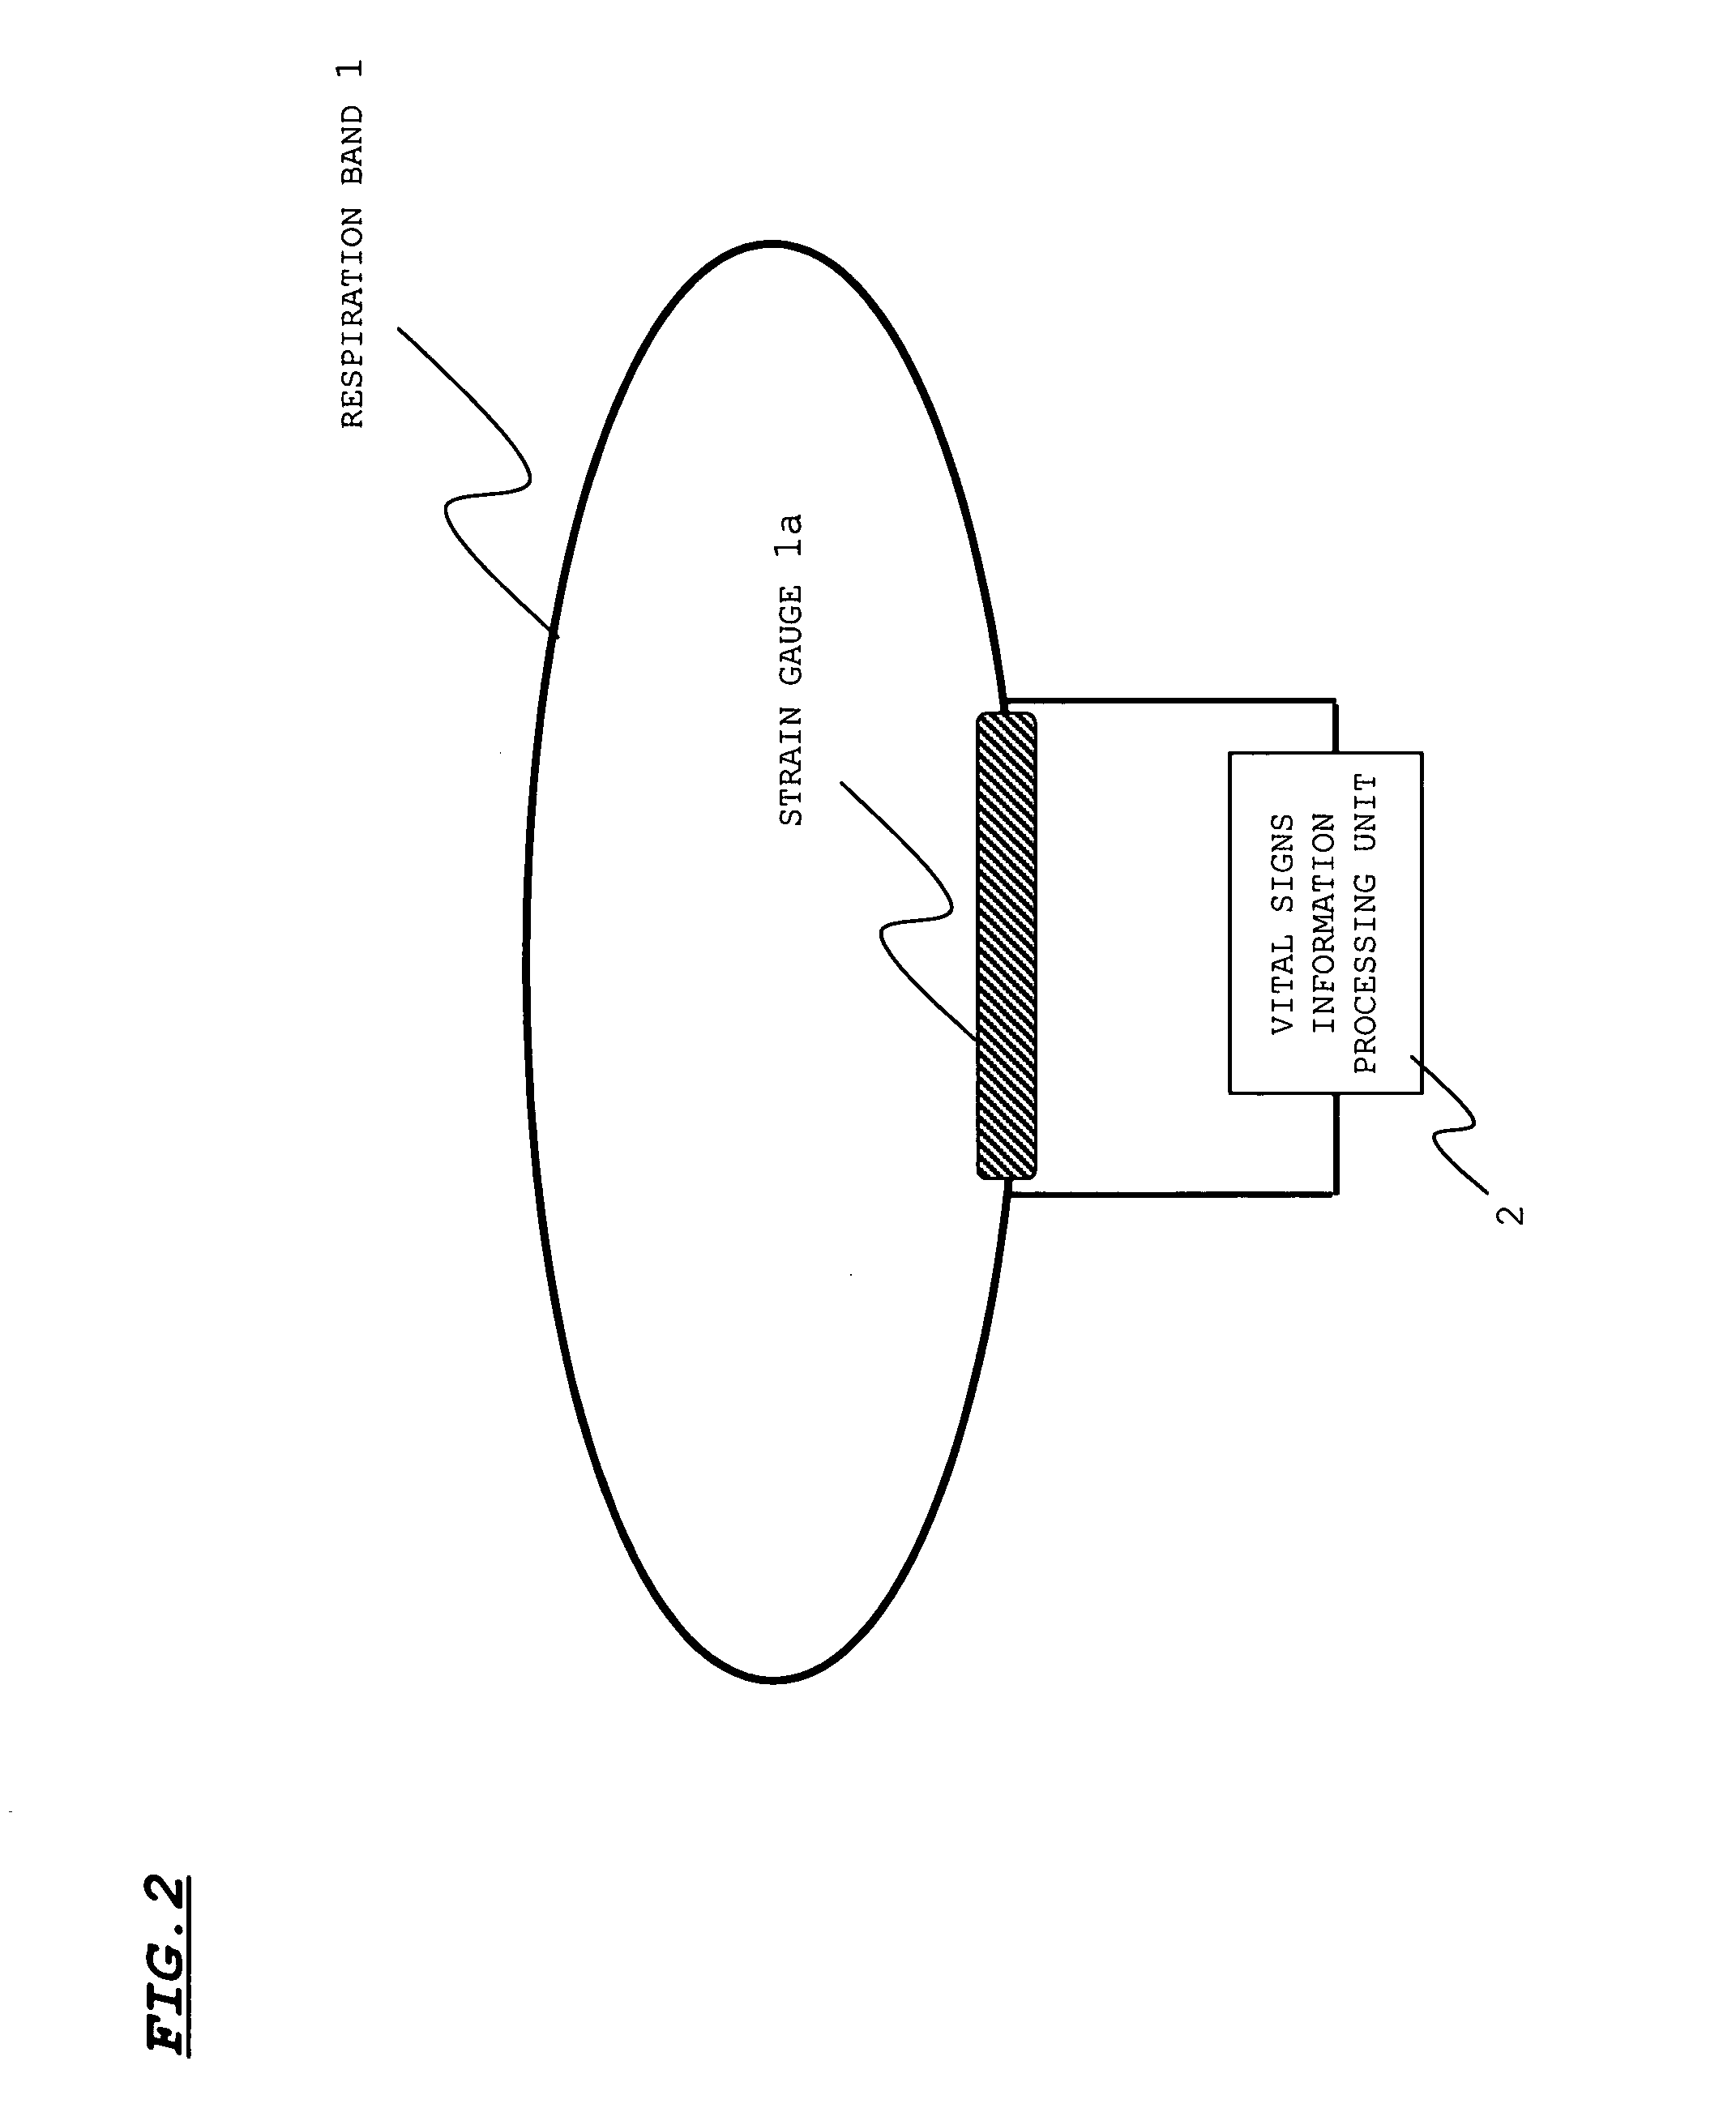 Sleep state estimating device and program product